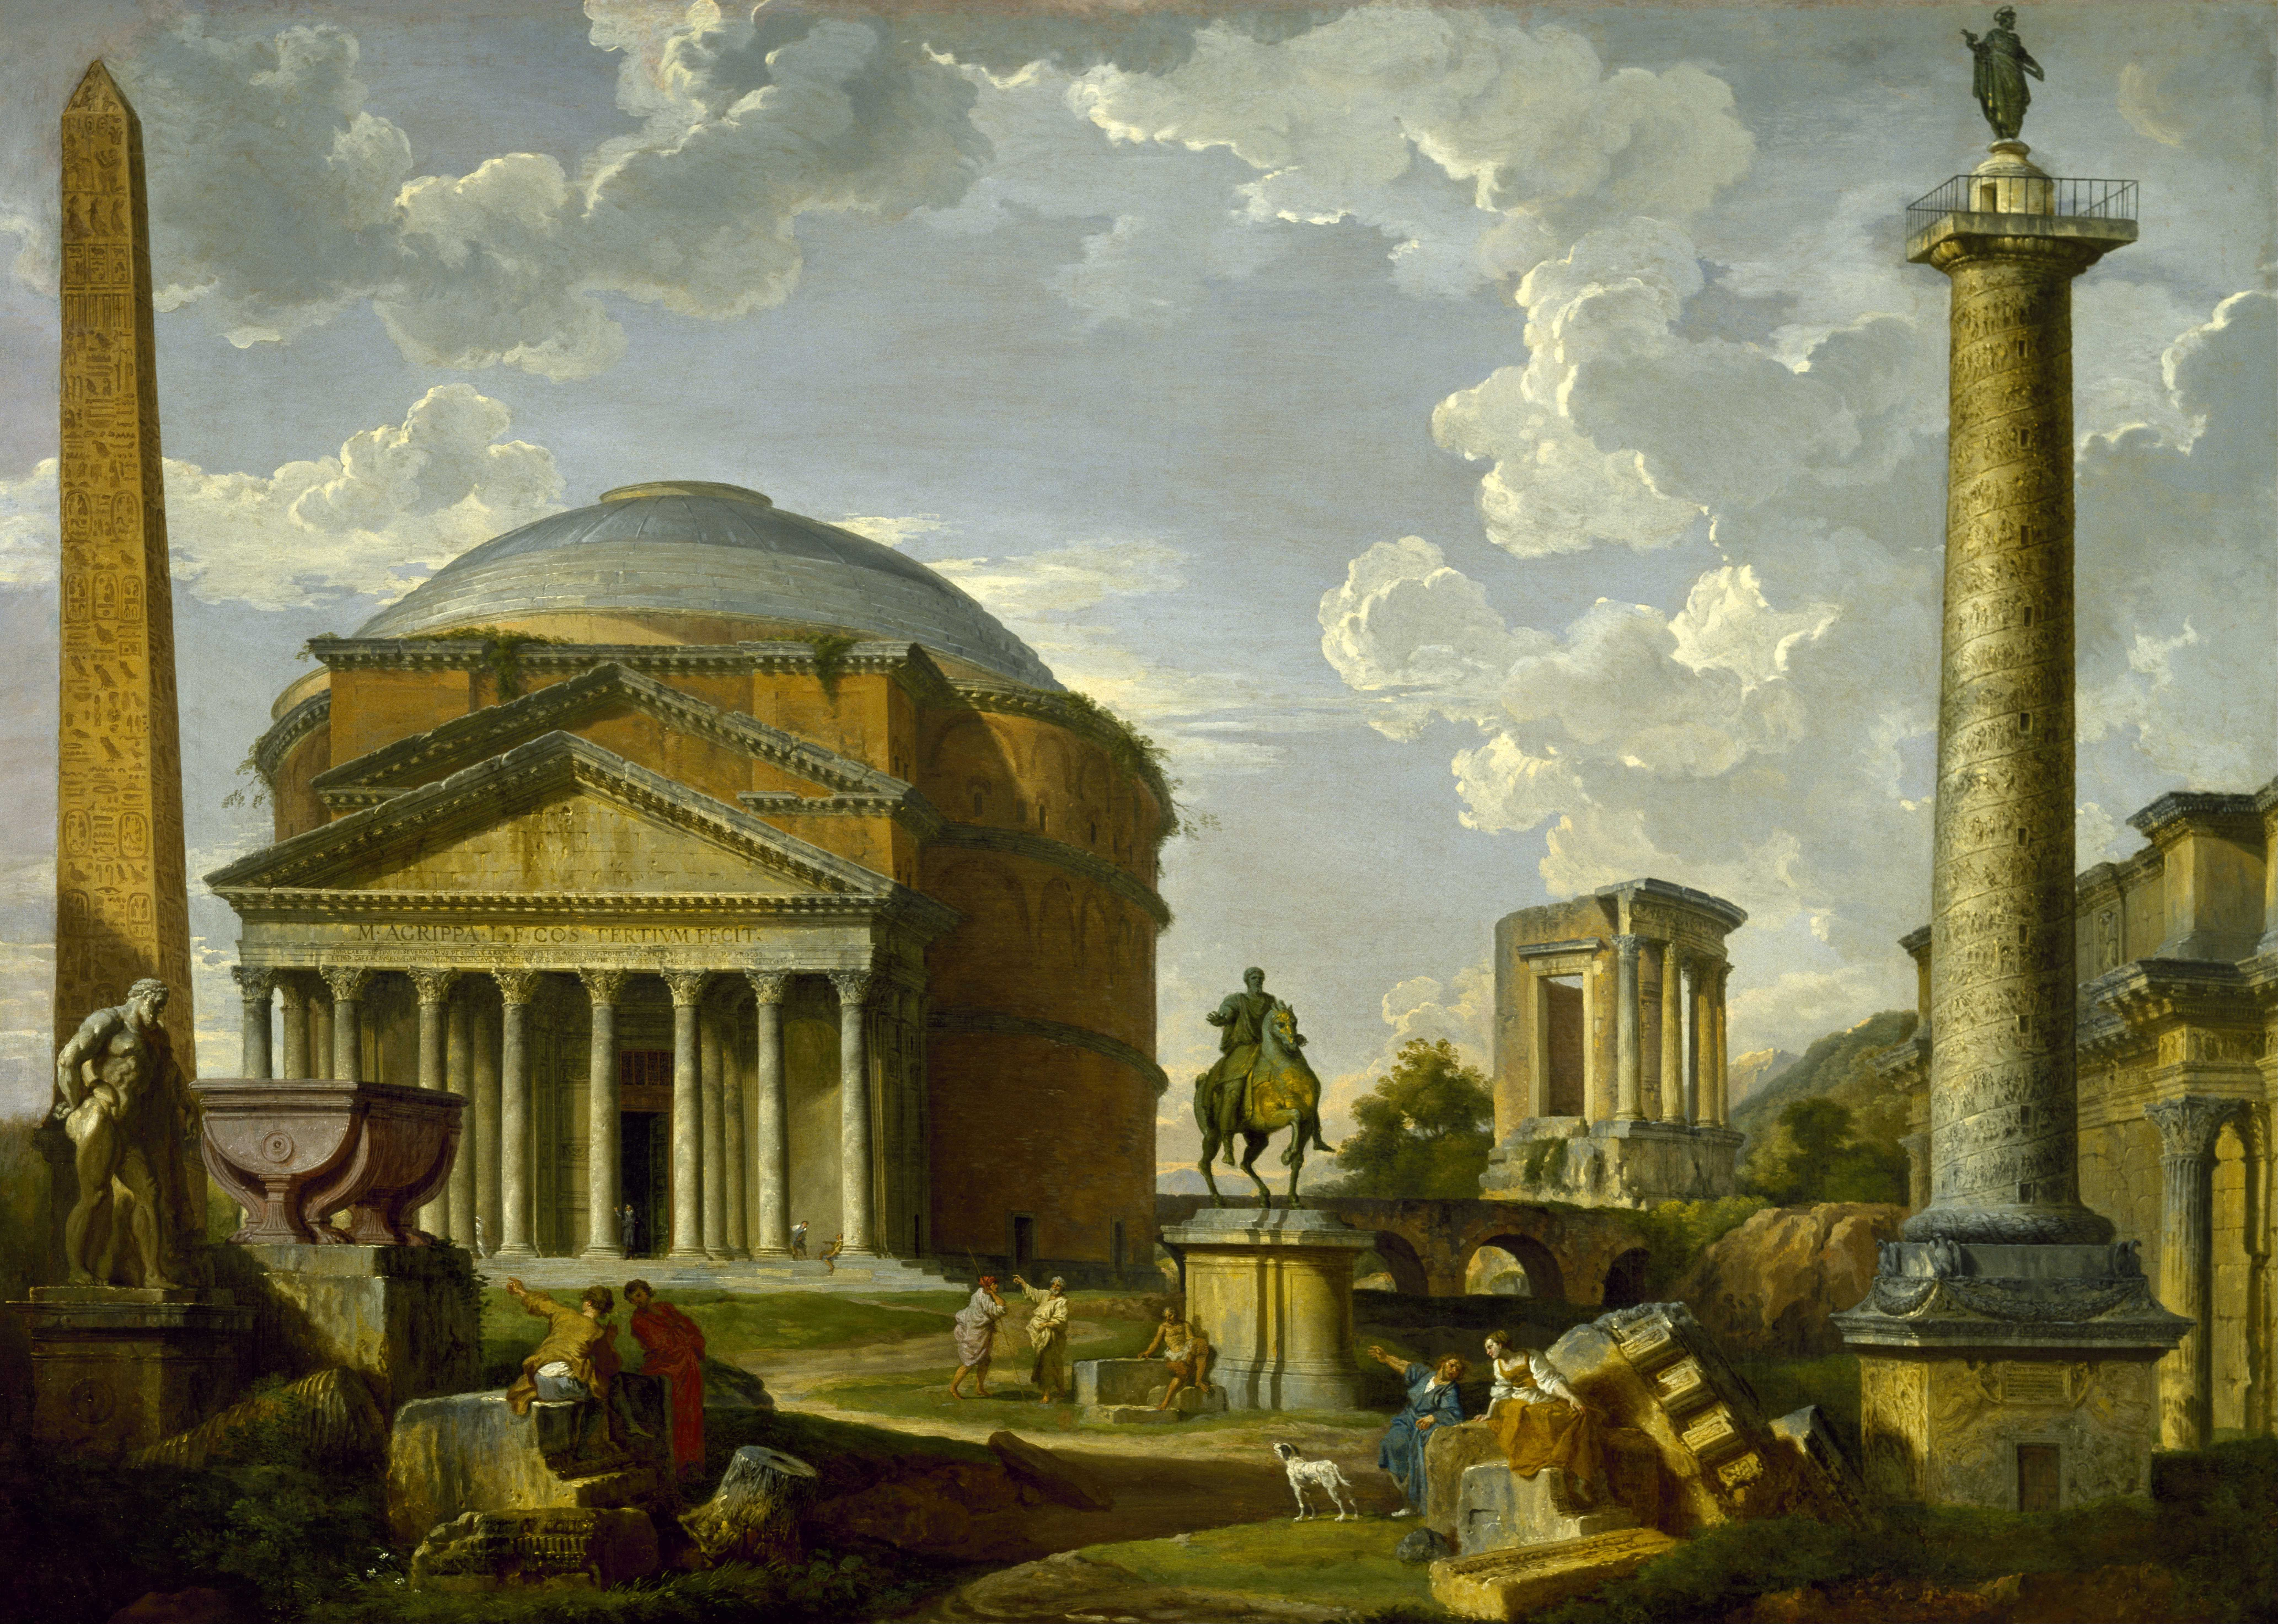 Giovanni_Pauolo_Panini_-_Fantasy_View_with_the_Pantheon_and_other_Monuments_of_Ancient_Rome_-_Google_Art_Project.jpg